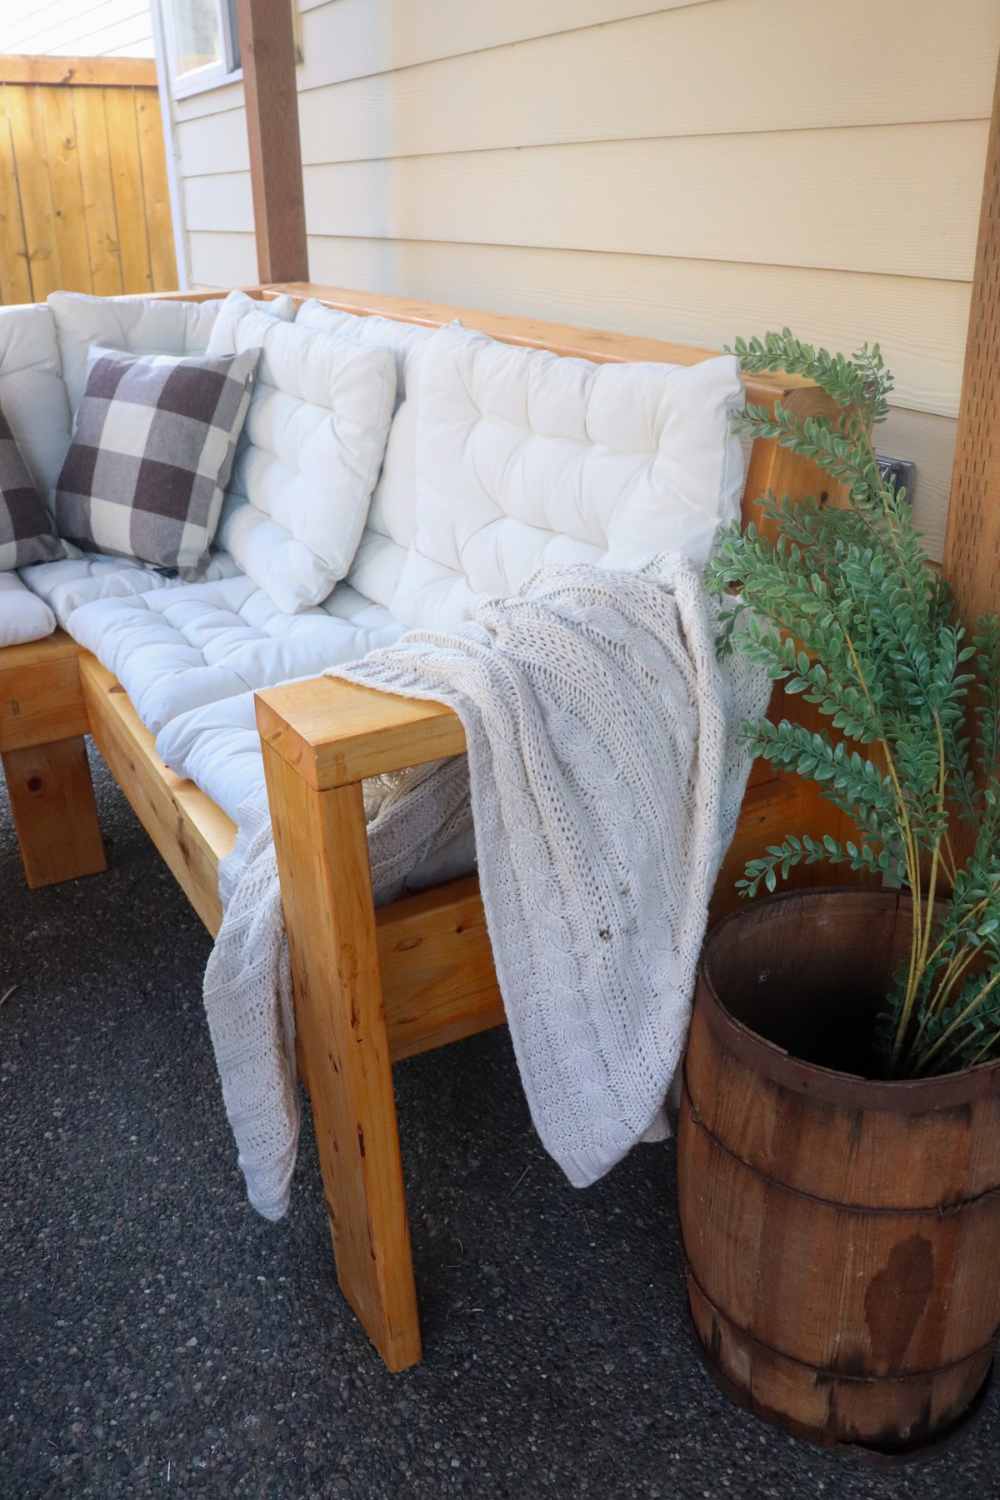 9-DIY-outdoor-sectional-couch-with-plans-sofa-furniture-angled-back-2x6-pine-Patio-makeover-decor-spring-summer-ideas